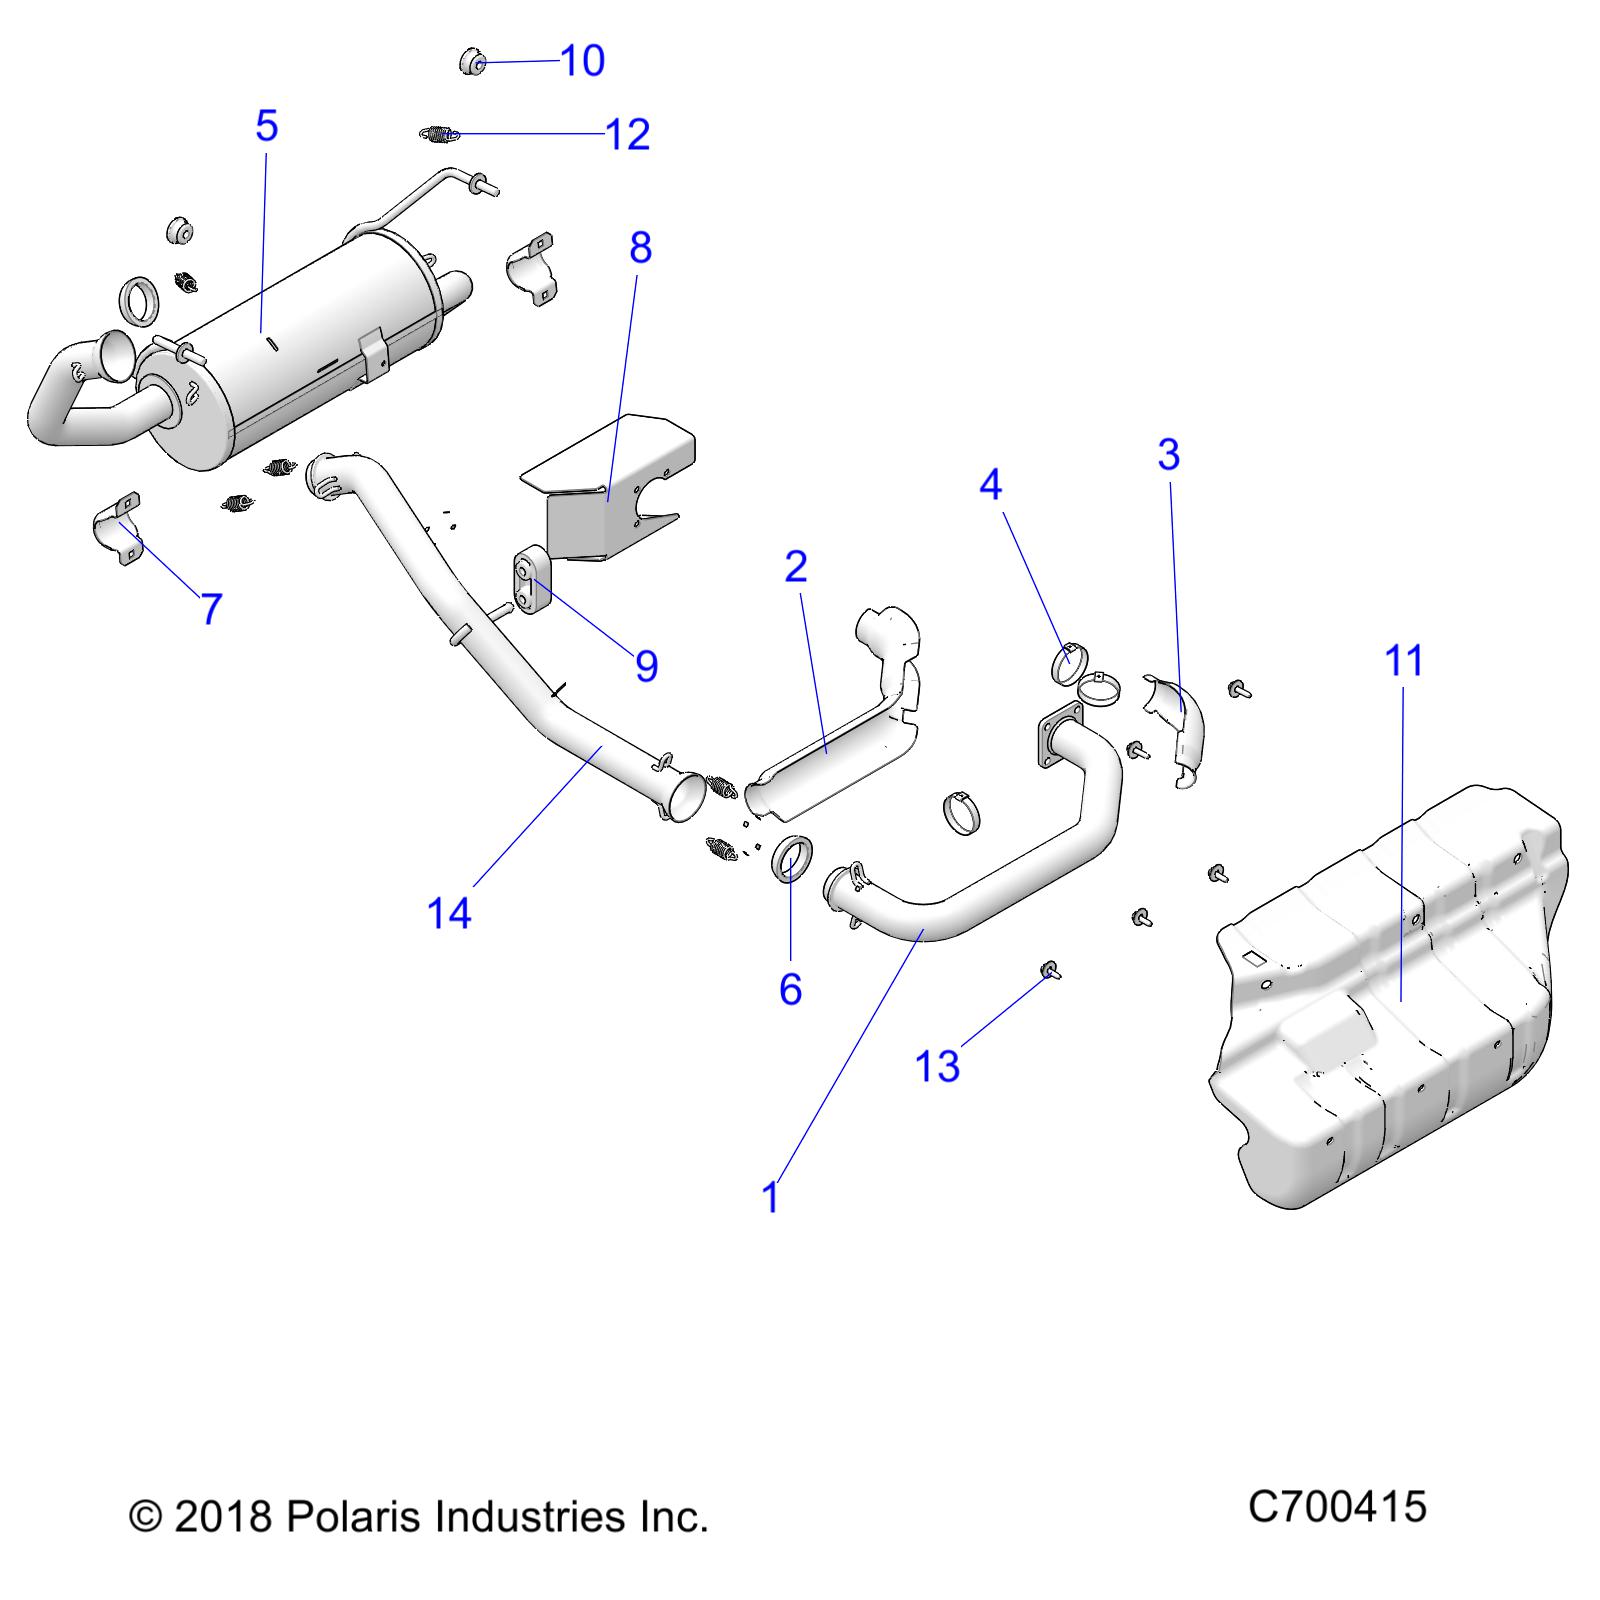 ENGINE, EXHAUST SYSTEM - R20RRED4F1/N1/SD4C1 (C700415)